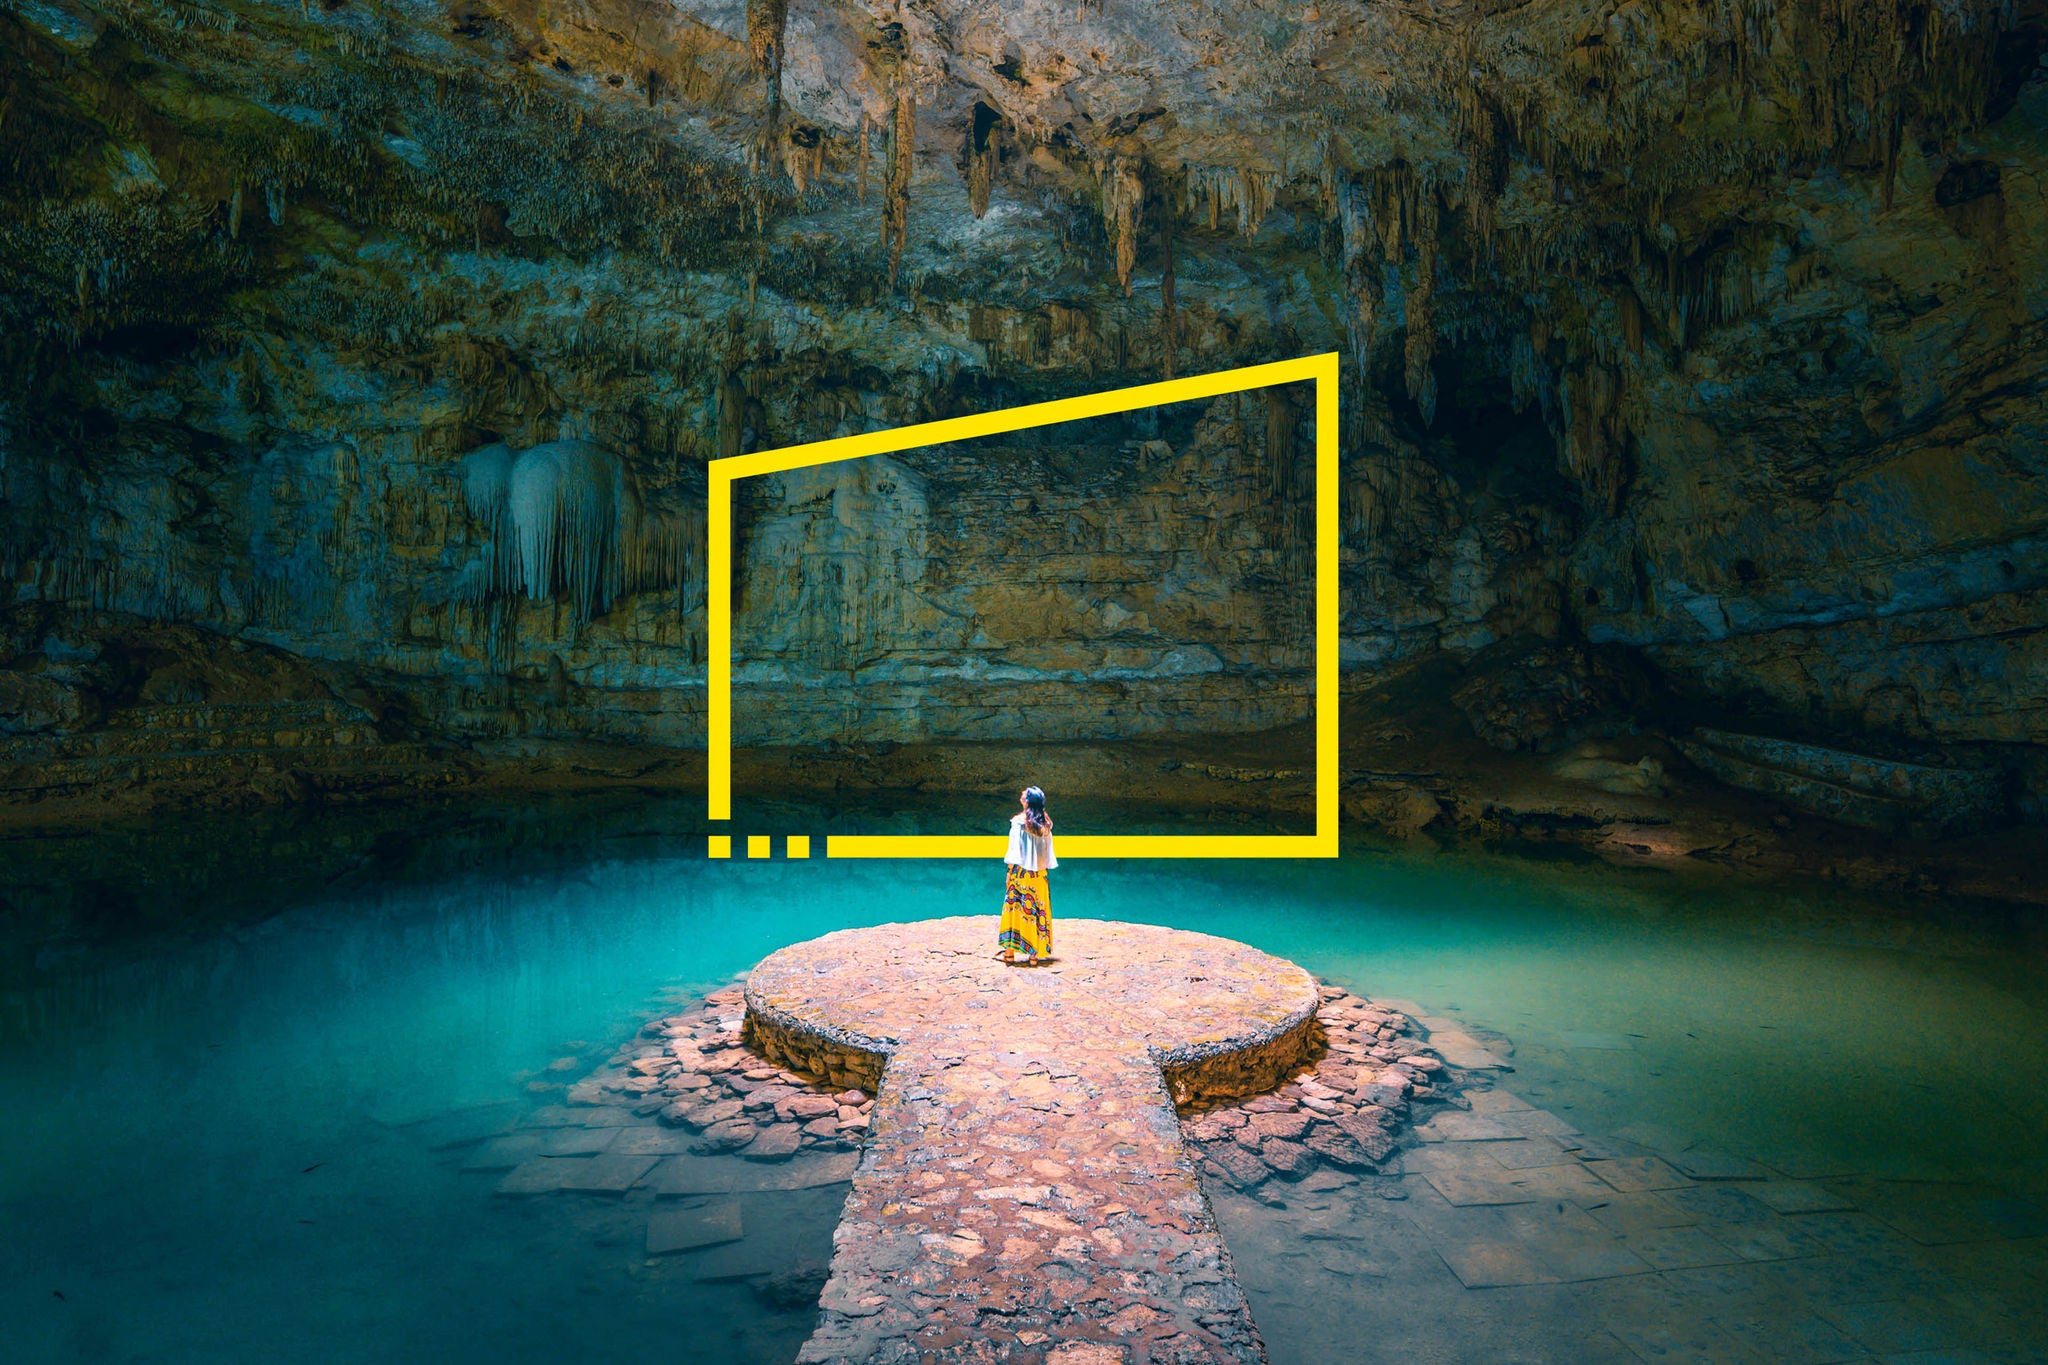 Woman standing alone in a cenote in mexico